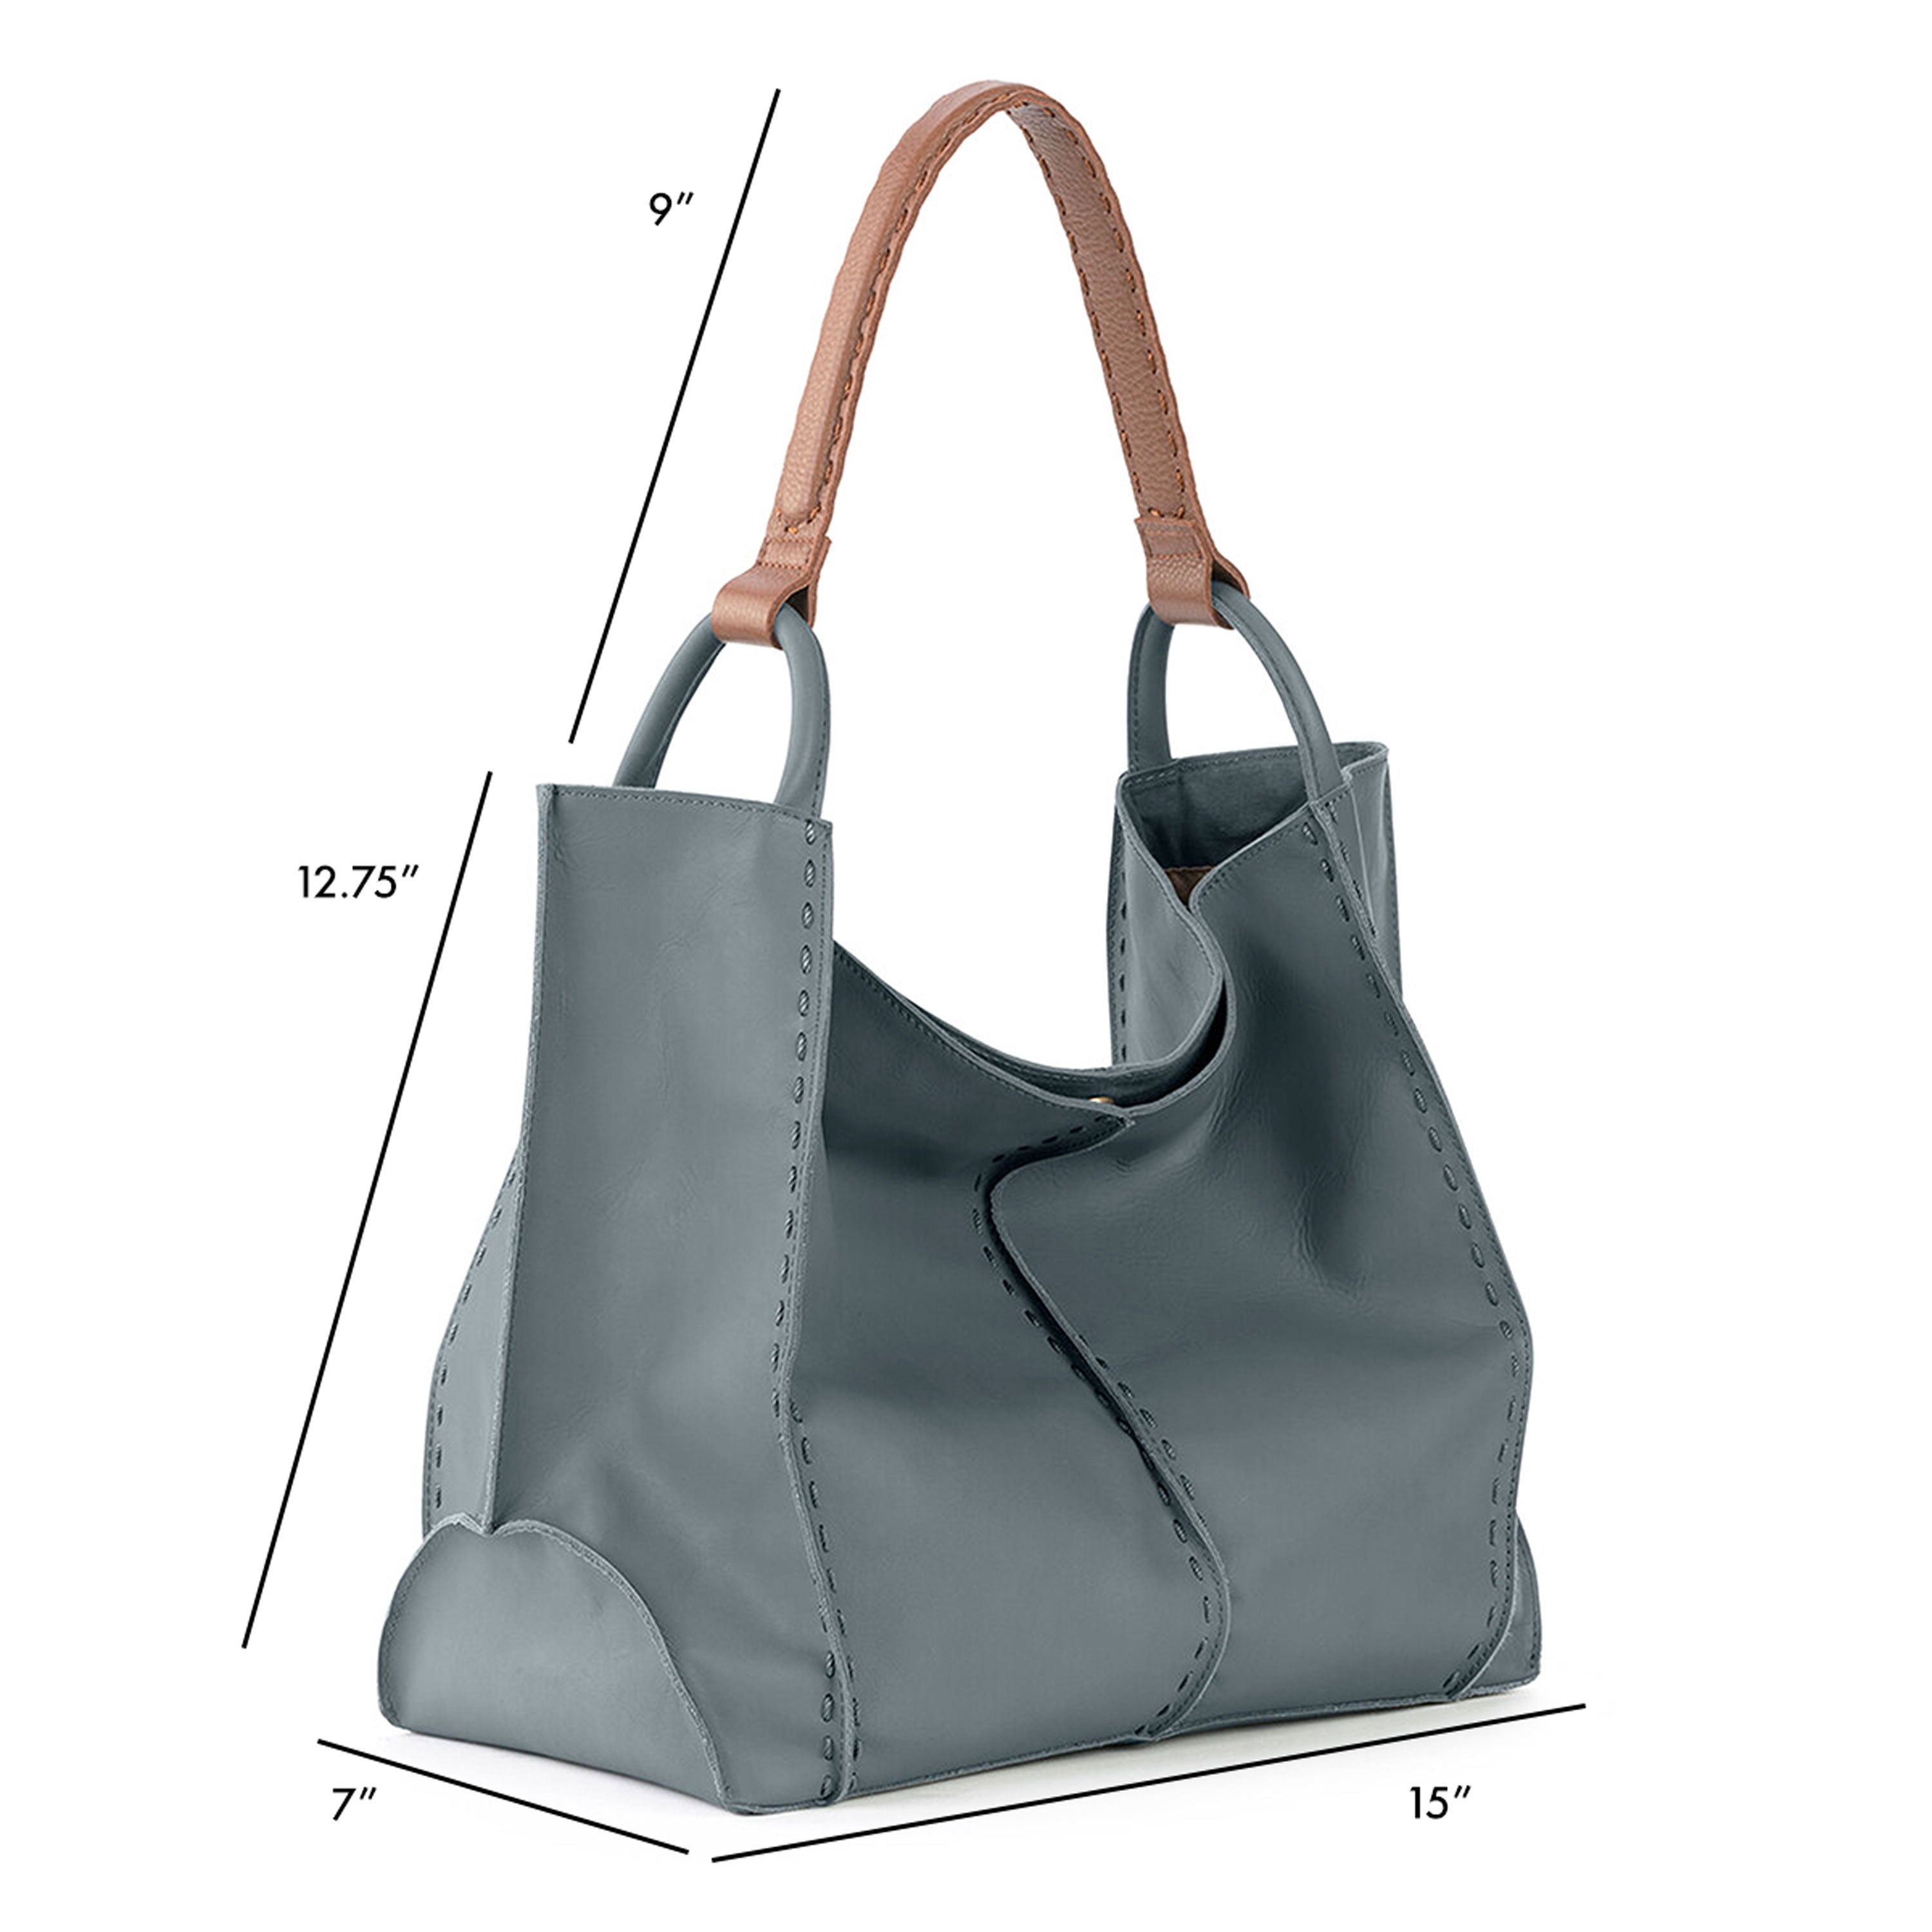 A Bucket Bag Originally Intended to Carry Champagne - The New York